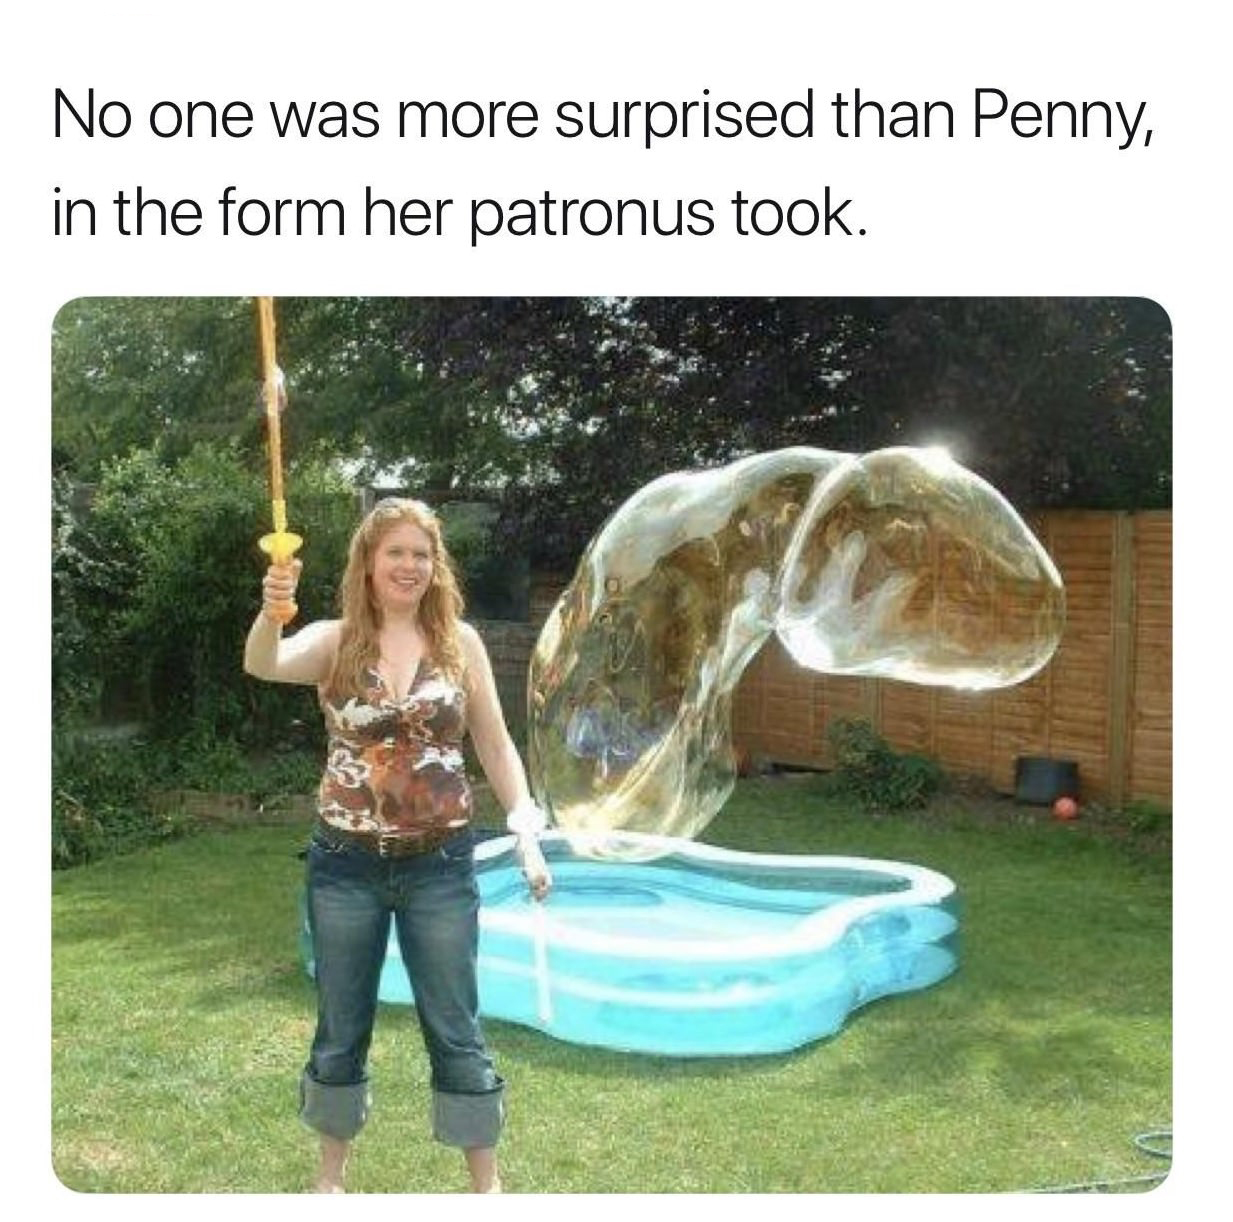 funny meme - No one was more surprised than Penny, in the form her patronus took.